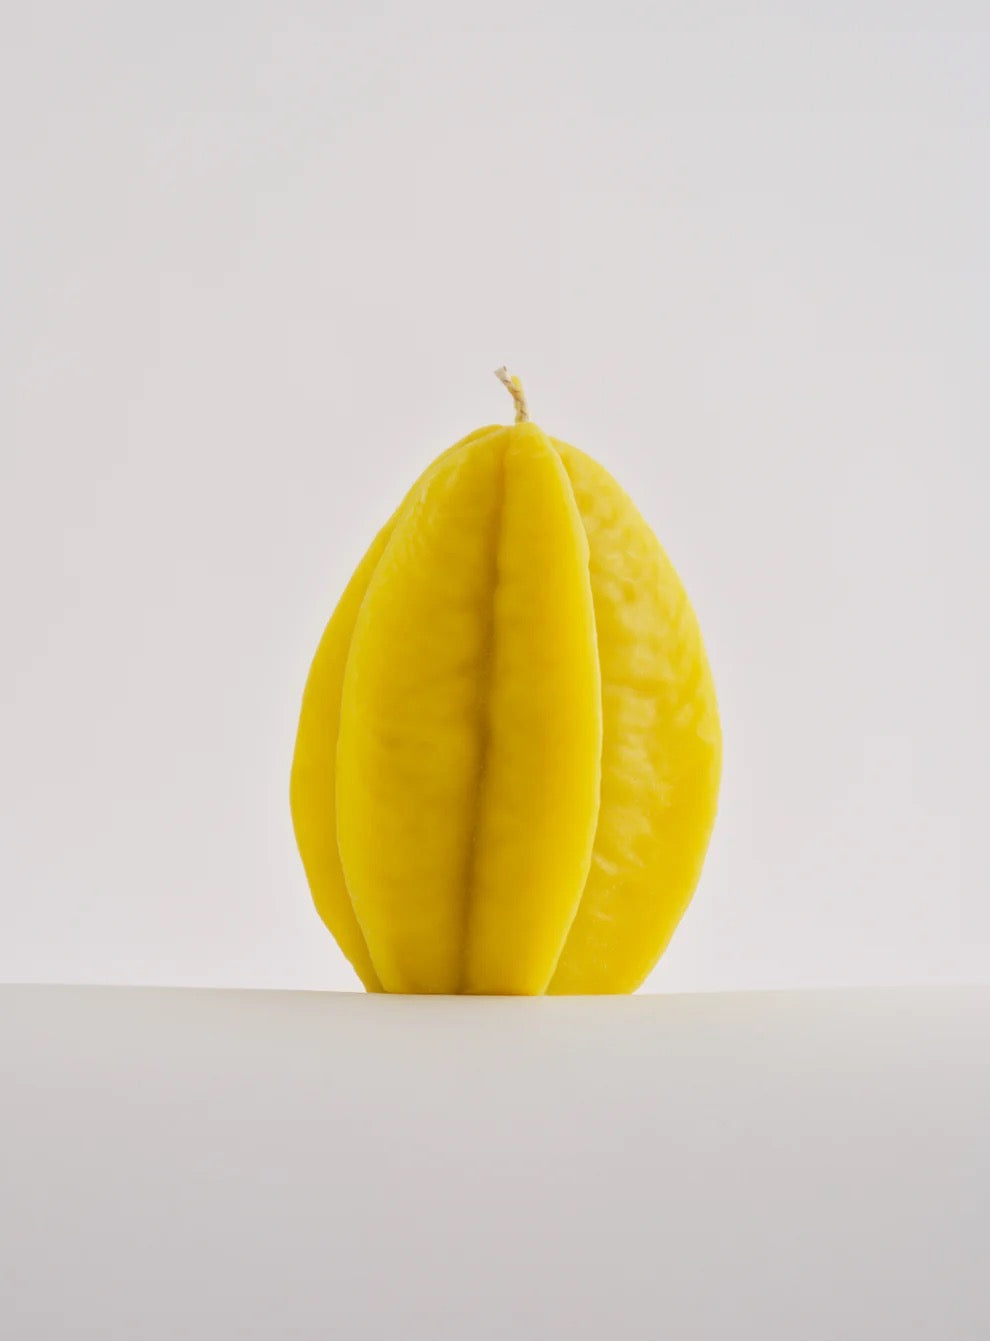 A Nonna's Grocer Starfruit Candle – Large sitting on a white surface.